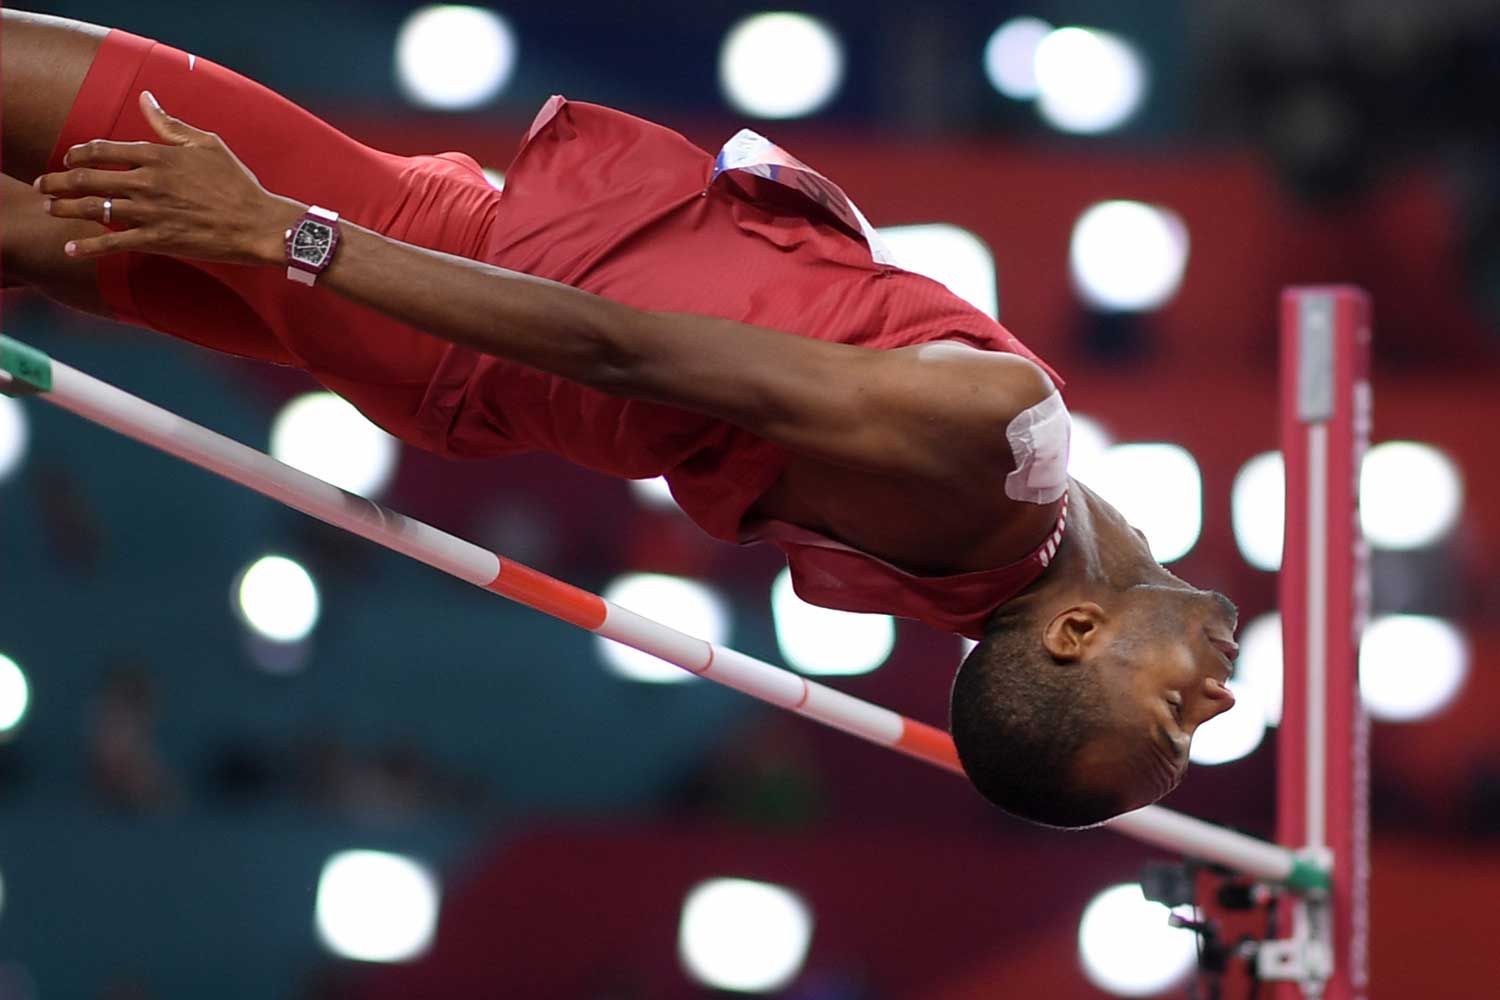 Qatar's Mutaz Essa Barshim competes in the Men's High Jump final at the 2019 IAAF Athletics World Championships at the Khalifa International stadium in Doha on October 4, 2019, with the with the RM 67-02 Automatic Mutaz Essa Barshim – High Jump on his wrist (Photo by Kirill KUDRYAVTSEV / AFP) (Photo by KIRILL KUDRYAVTSEV / AFP via Getty Images)